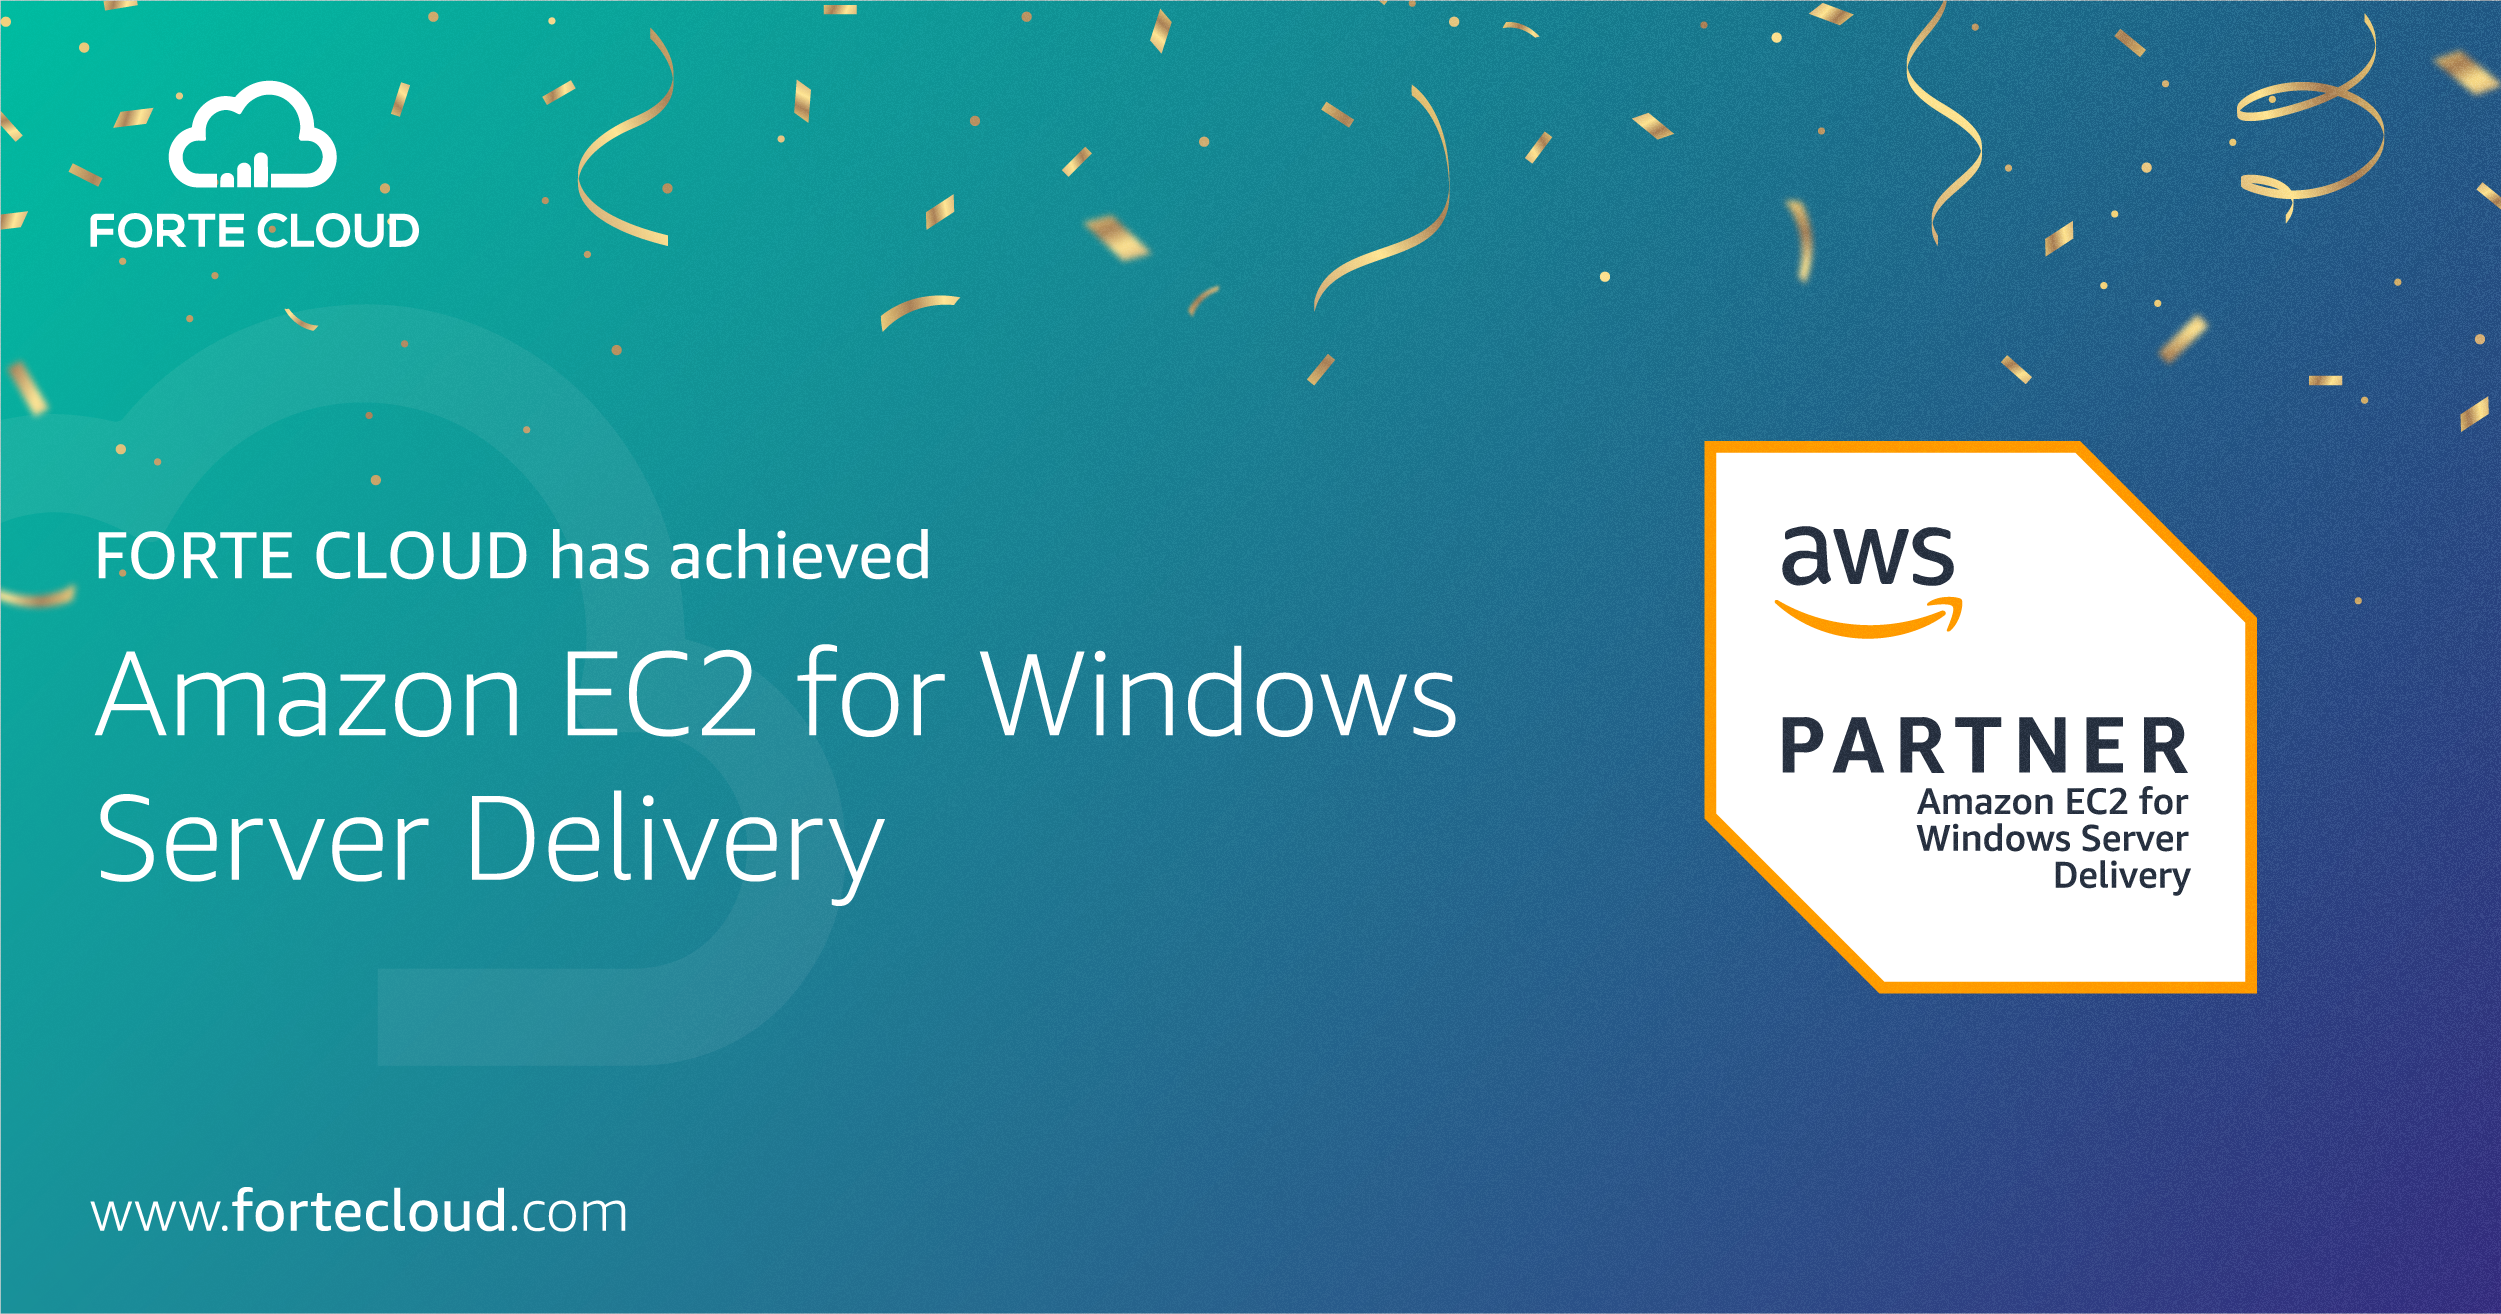 AWS Amazon EC2 for Windows Service Delivery